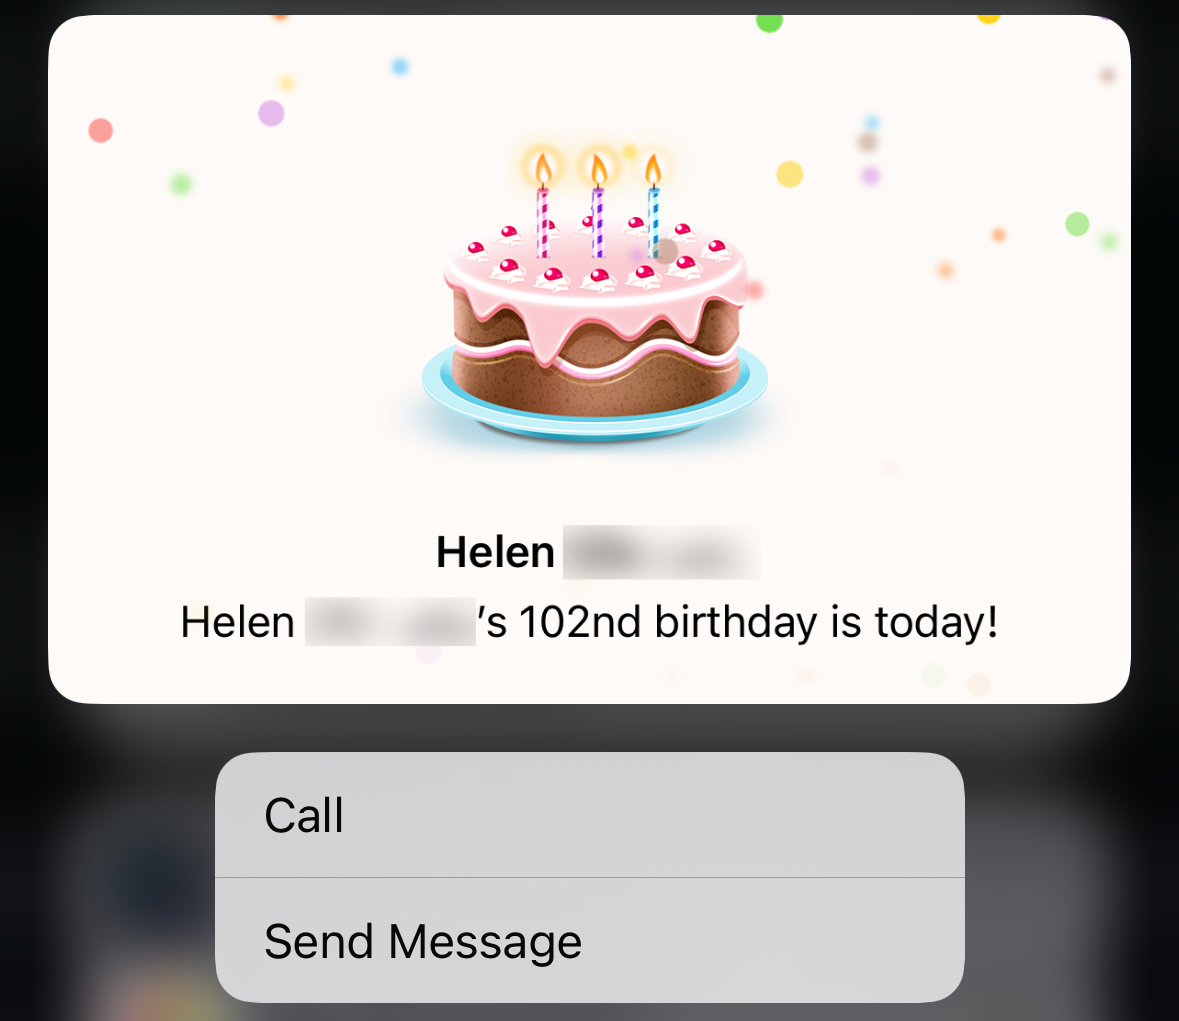 A graphic birthday cake with three candles implying a notification about someone's 102nd birthday; options to call or send a message below. Text: 'Helen [surname redacted]s 102nd birthday is today!'